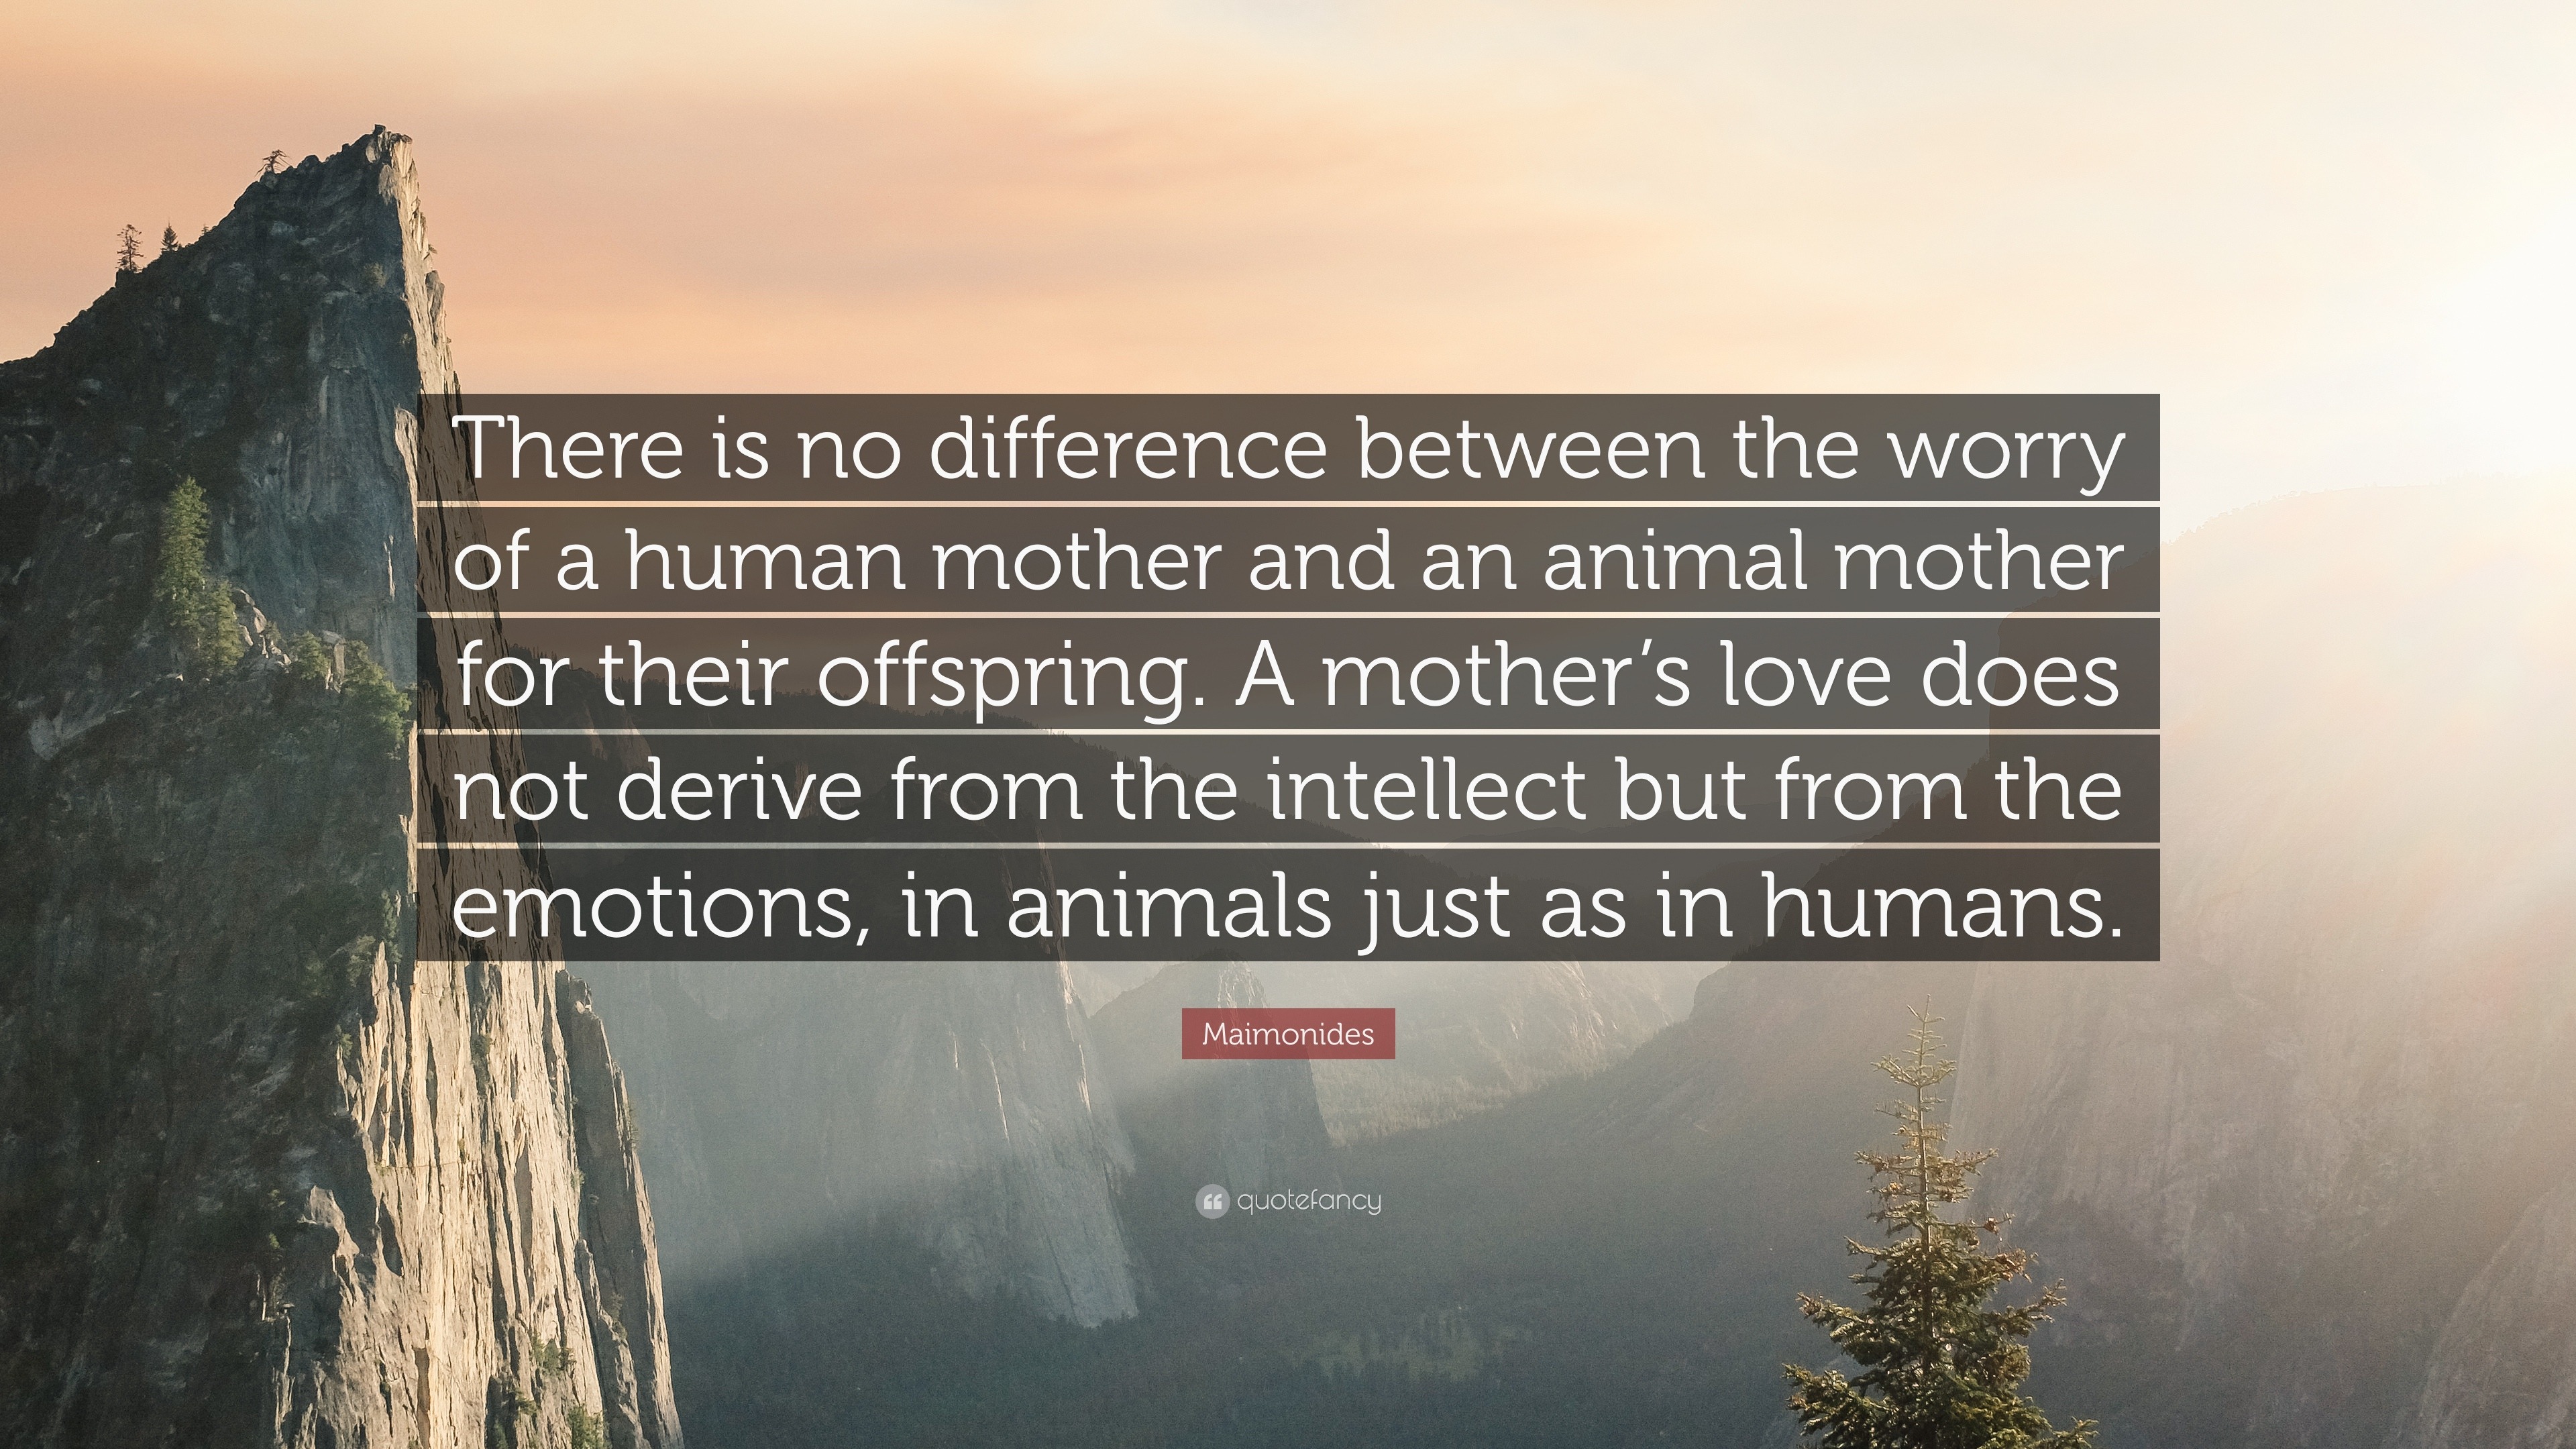 Maimonides Quote: “There is no difference between the worry of a human  mother and an animal mother for their offspring. A mother's love doe...”